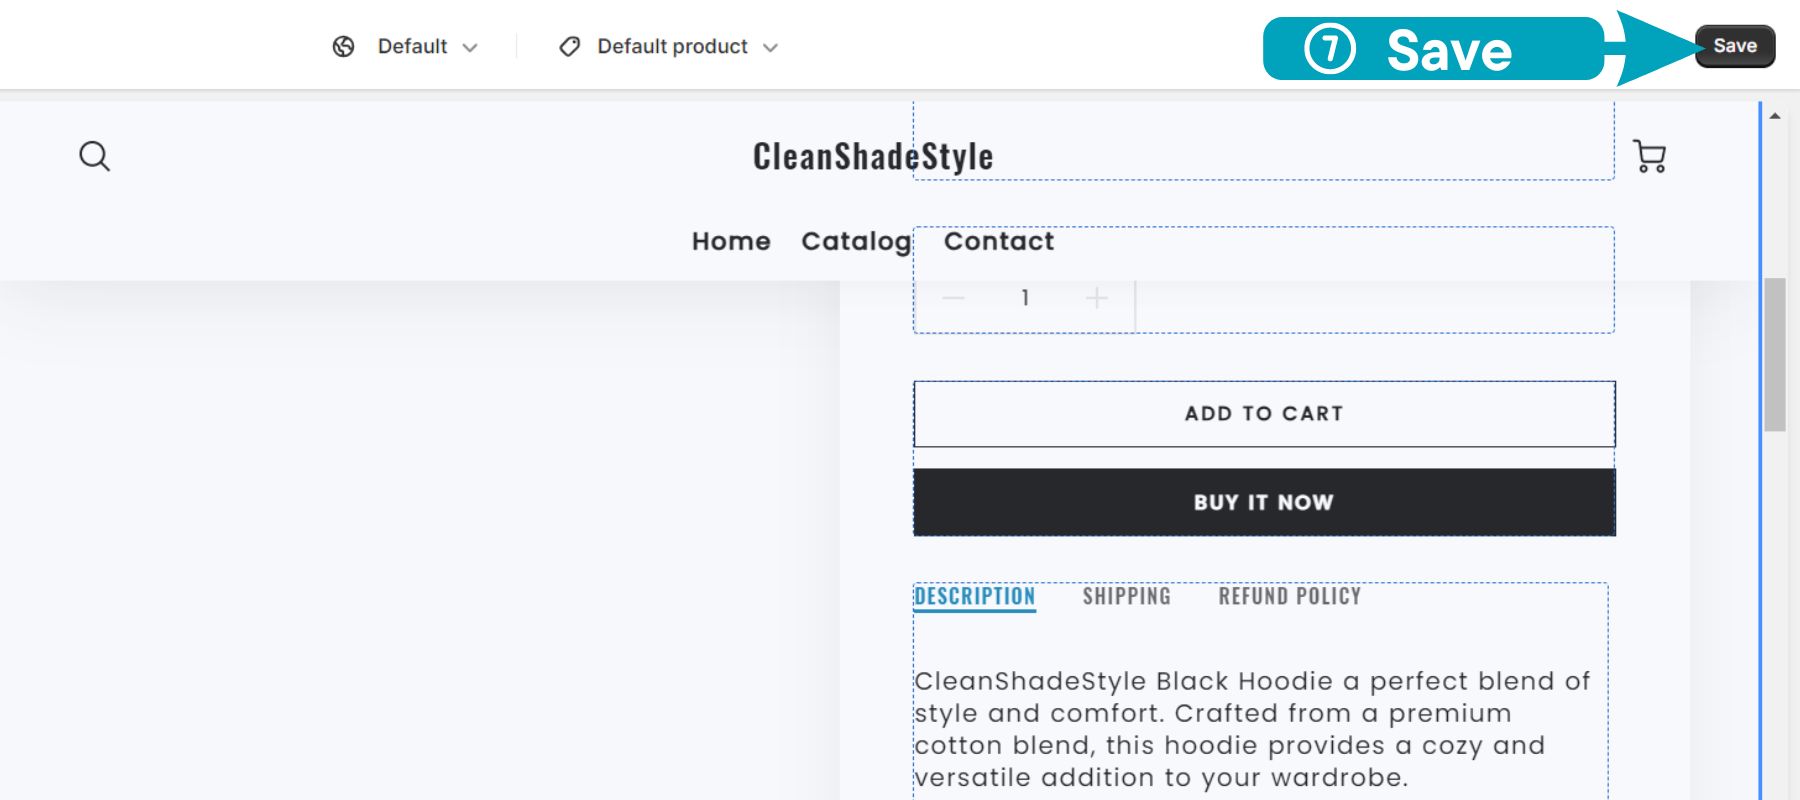 Customize your tabs on Shopify